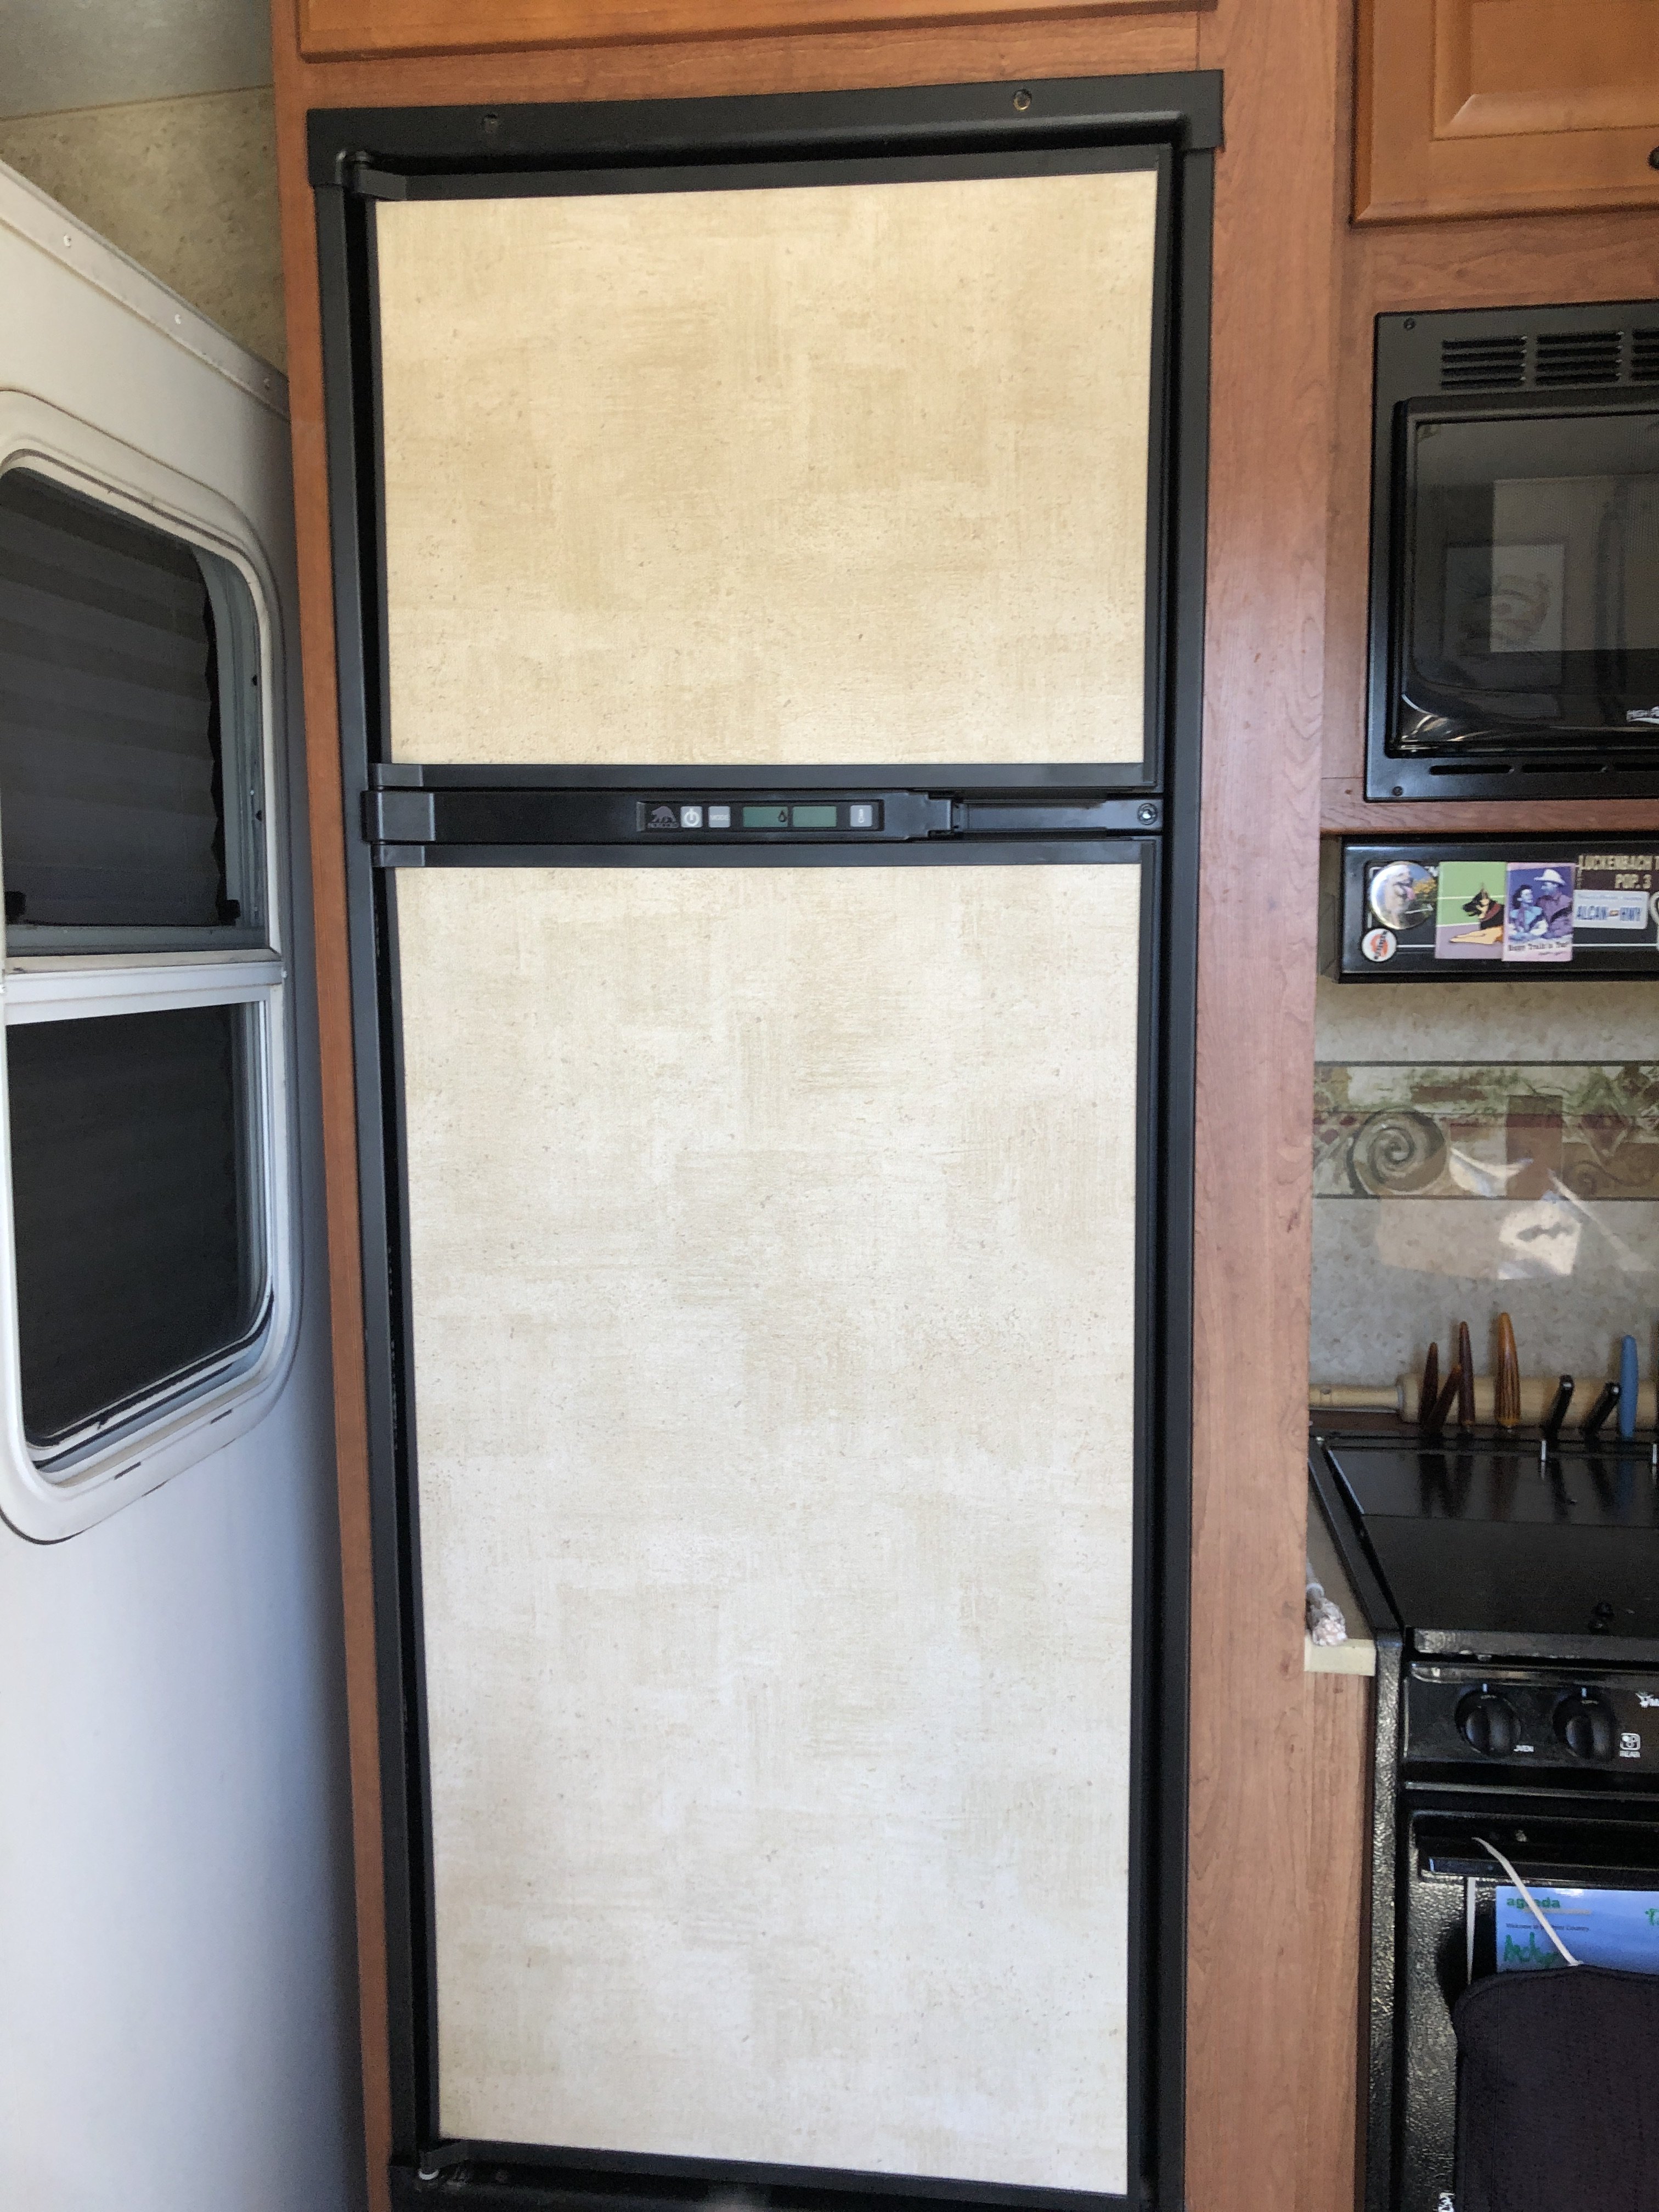 Norcold refrigerator replacement model NA8LXR